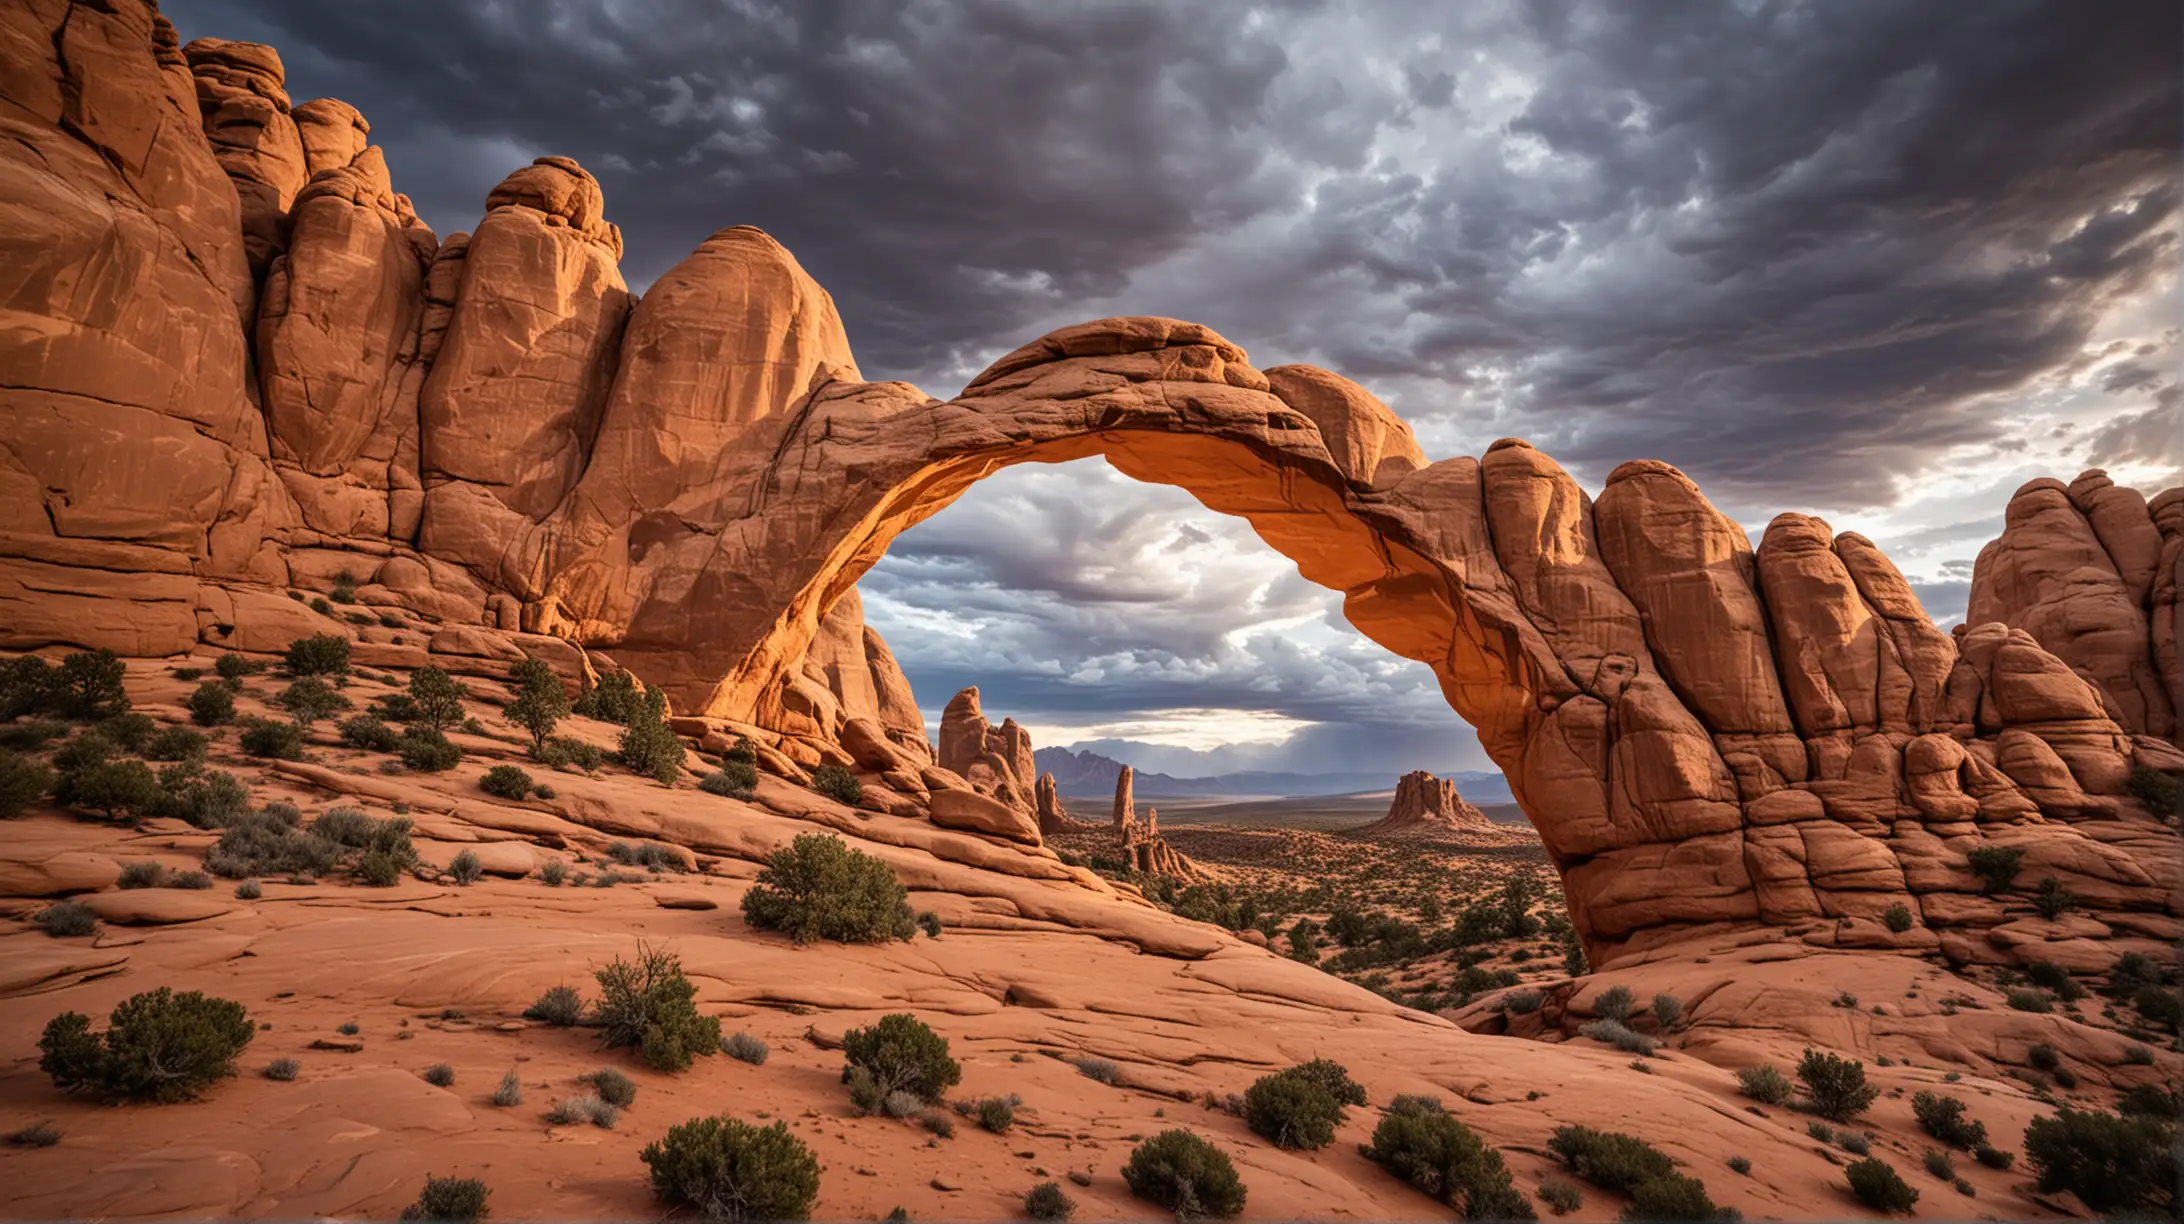 Skyline Arch, an arch in Arches National Park, late afternoon, dramatic sky, warm light.